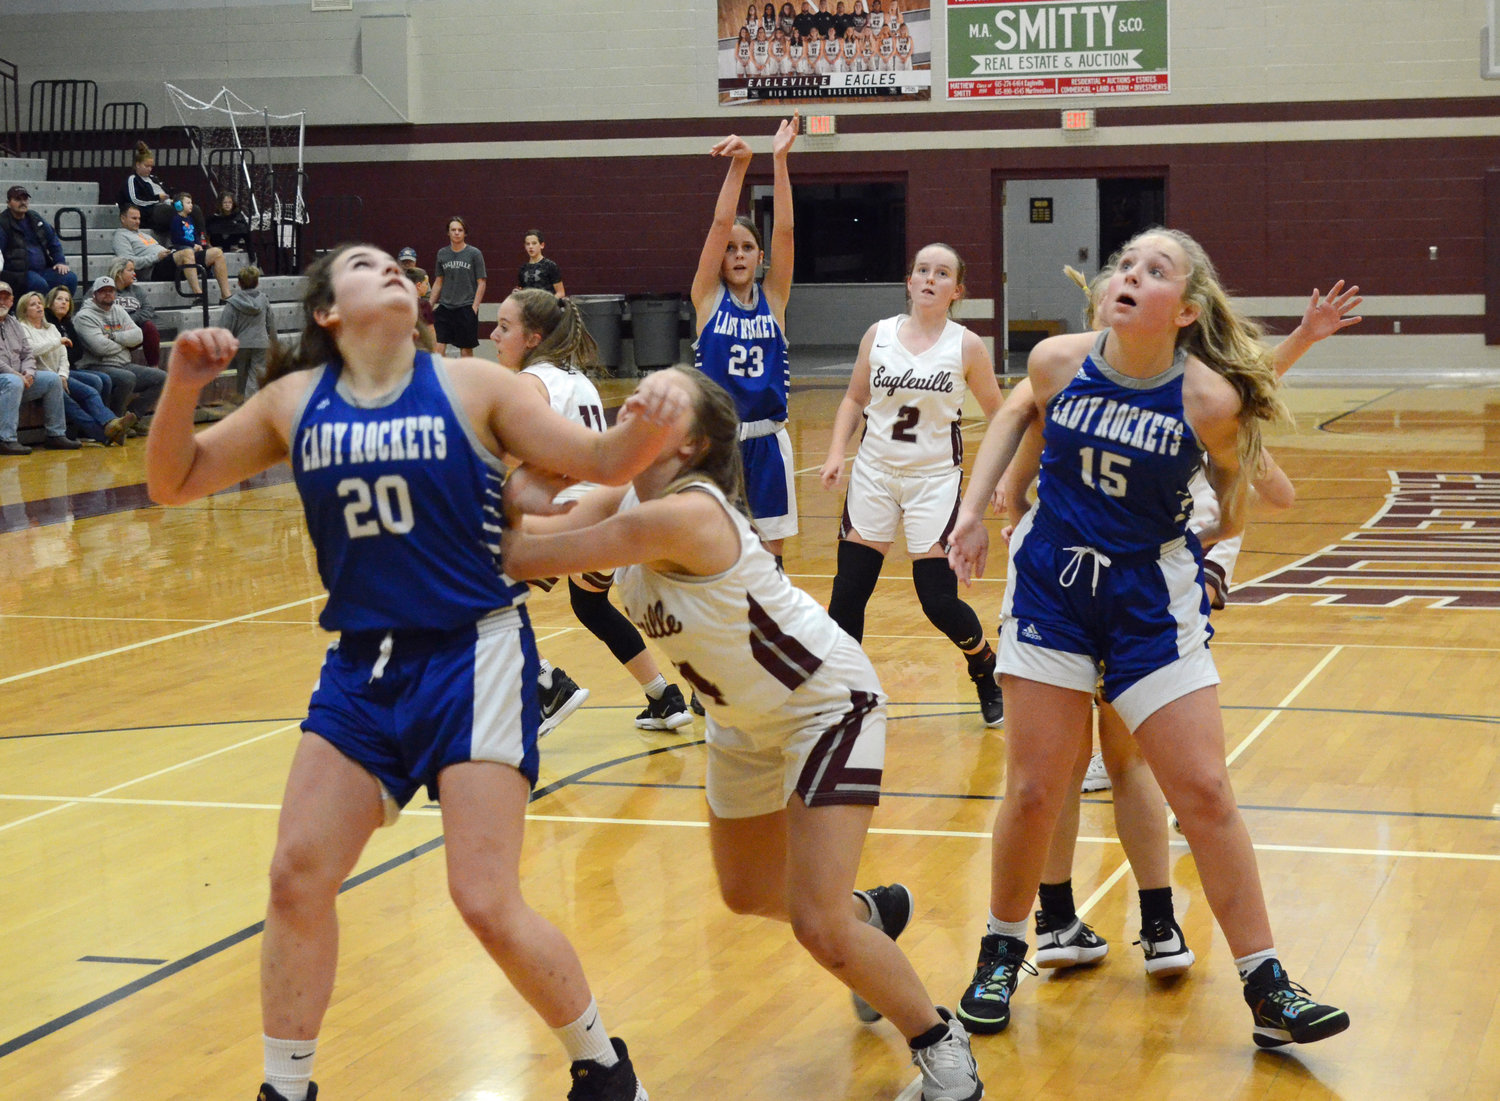 Lindsey Lee (20) and Josie Brown (15) box out as Sadie Smith (23) puts up a shot.